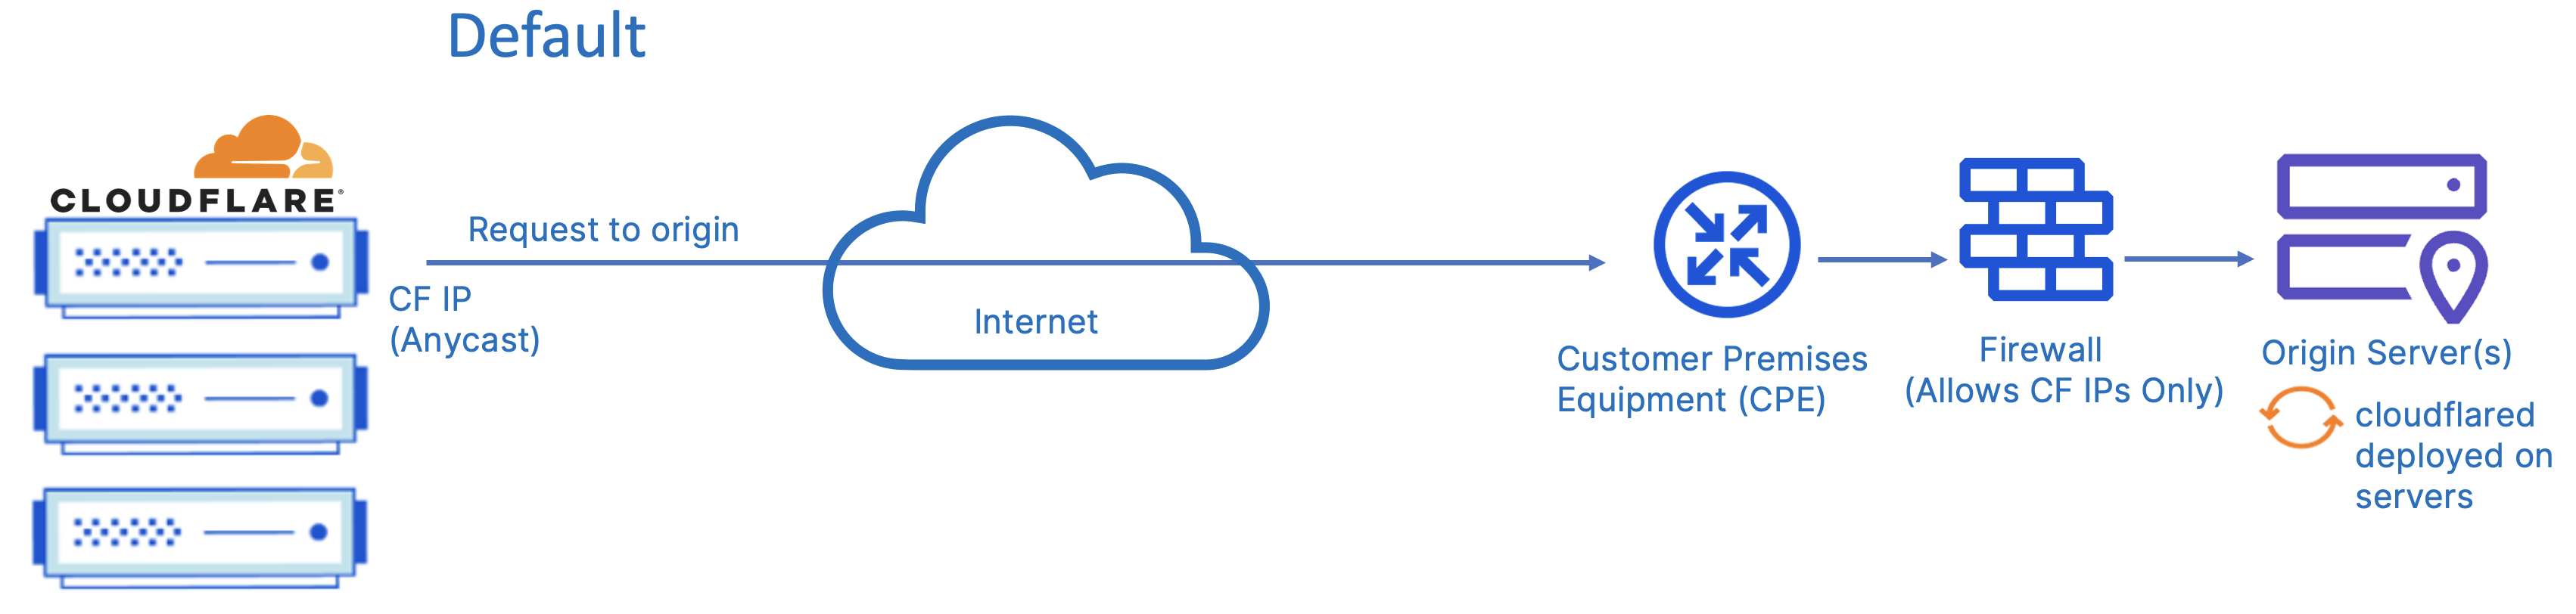 Figure 12: Connectivity from Cloudflare to origin server(s) via Internet